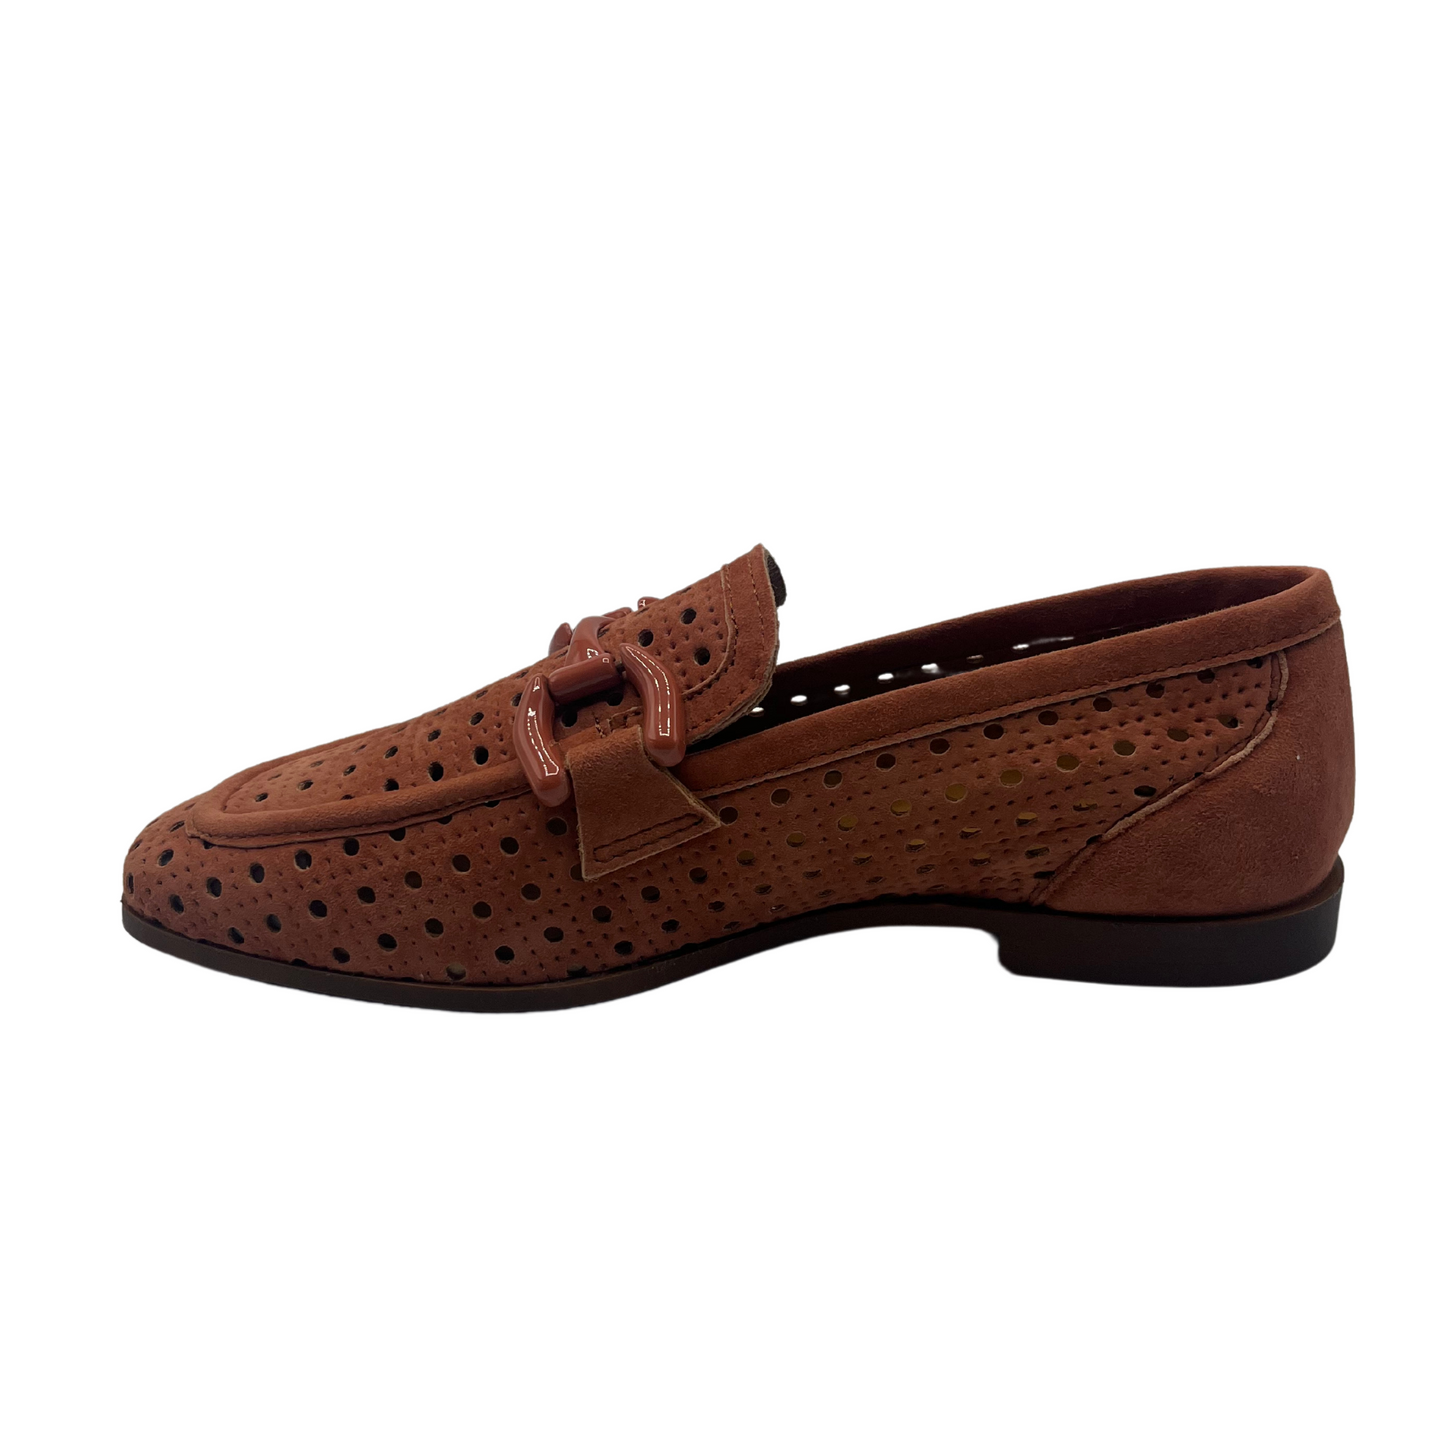 Left facing view of red brown perforated suede loafer with matching bit detail and low heel